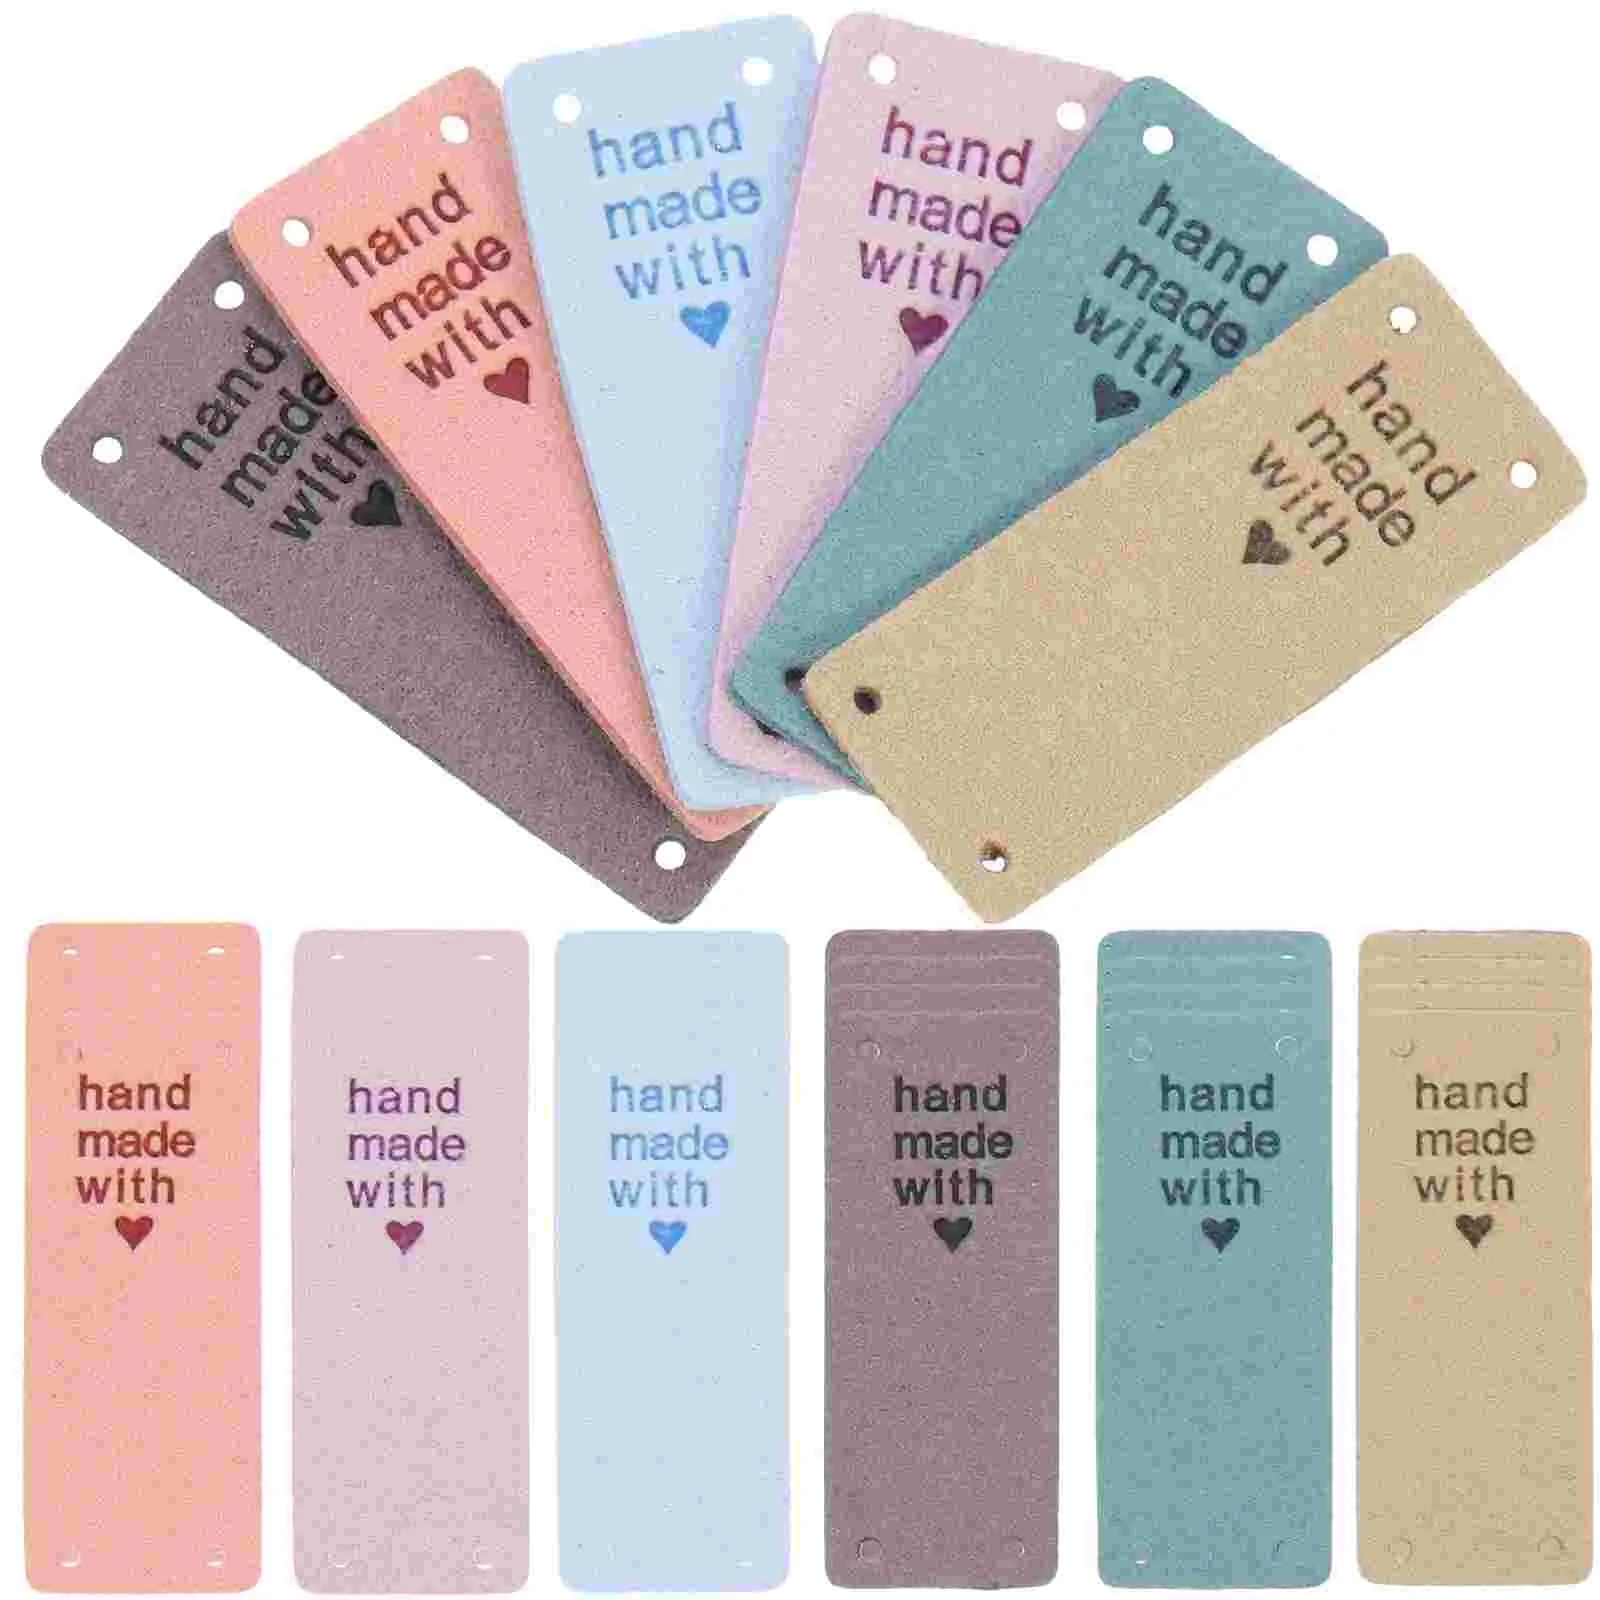 

Labels Label Tag Sewing Handmade Diy Clothing Clothes Tags Microfiber Scrapbooking Knitting Embossed Sew Apparel Embellishment